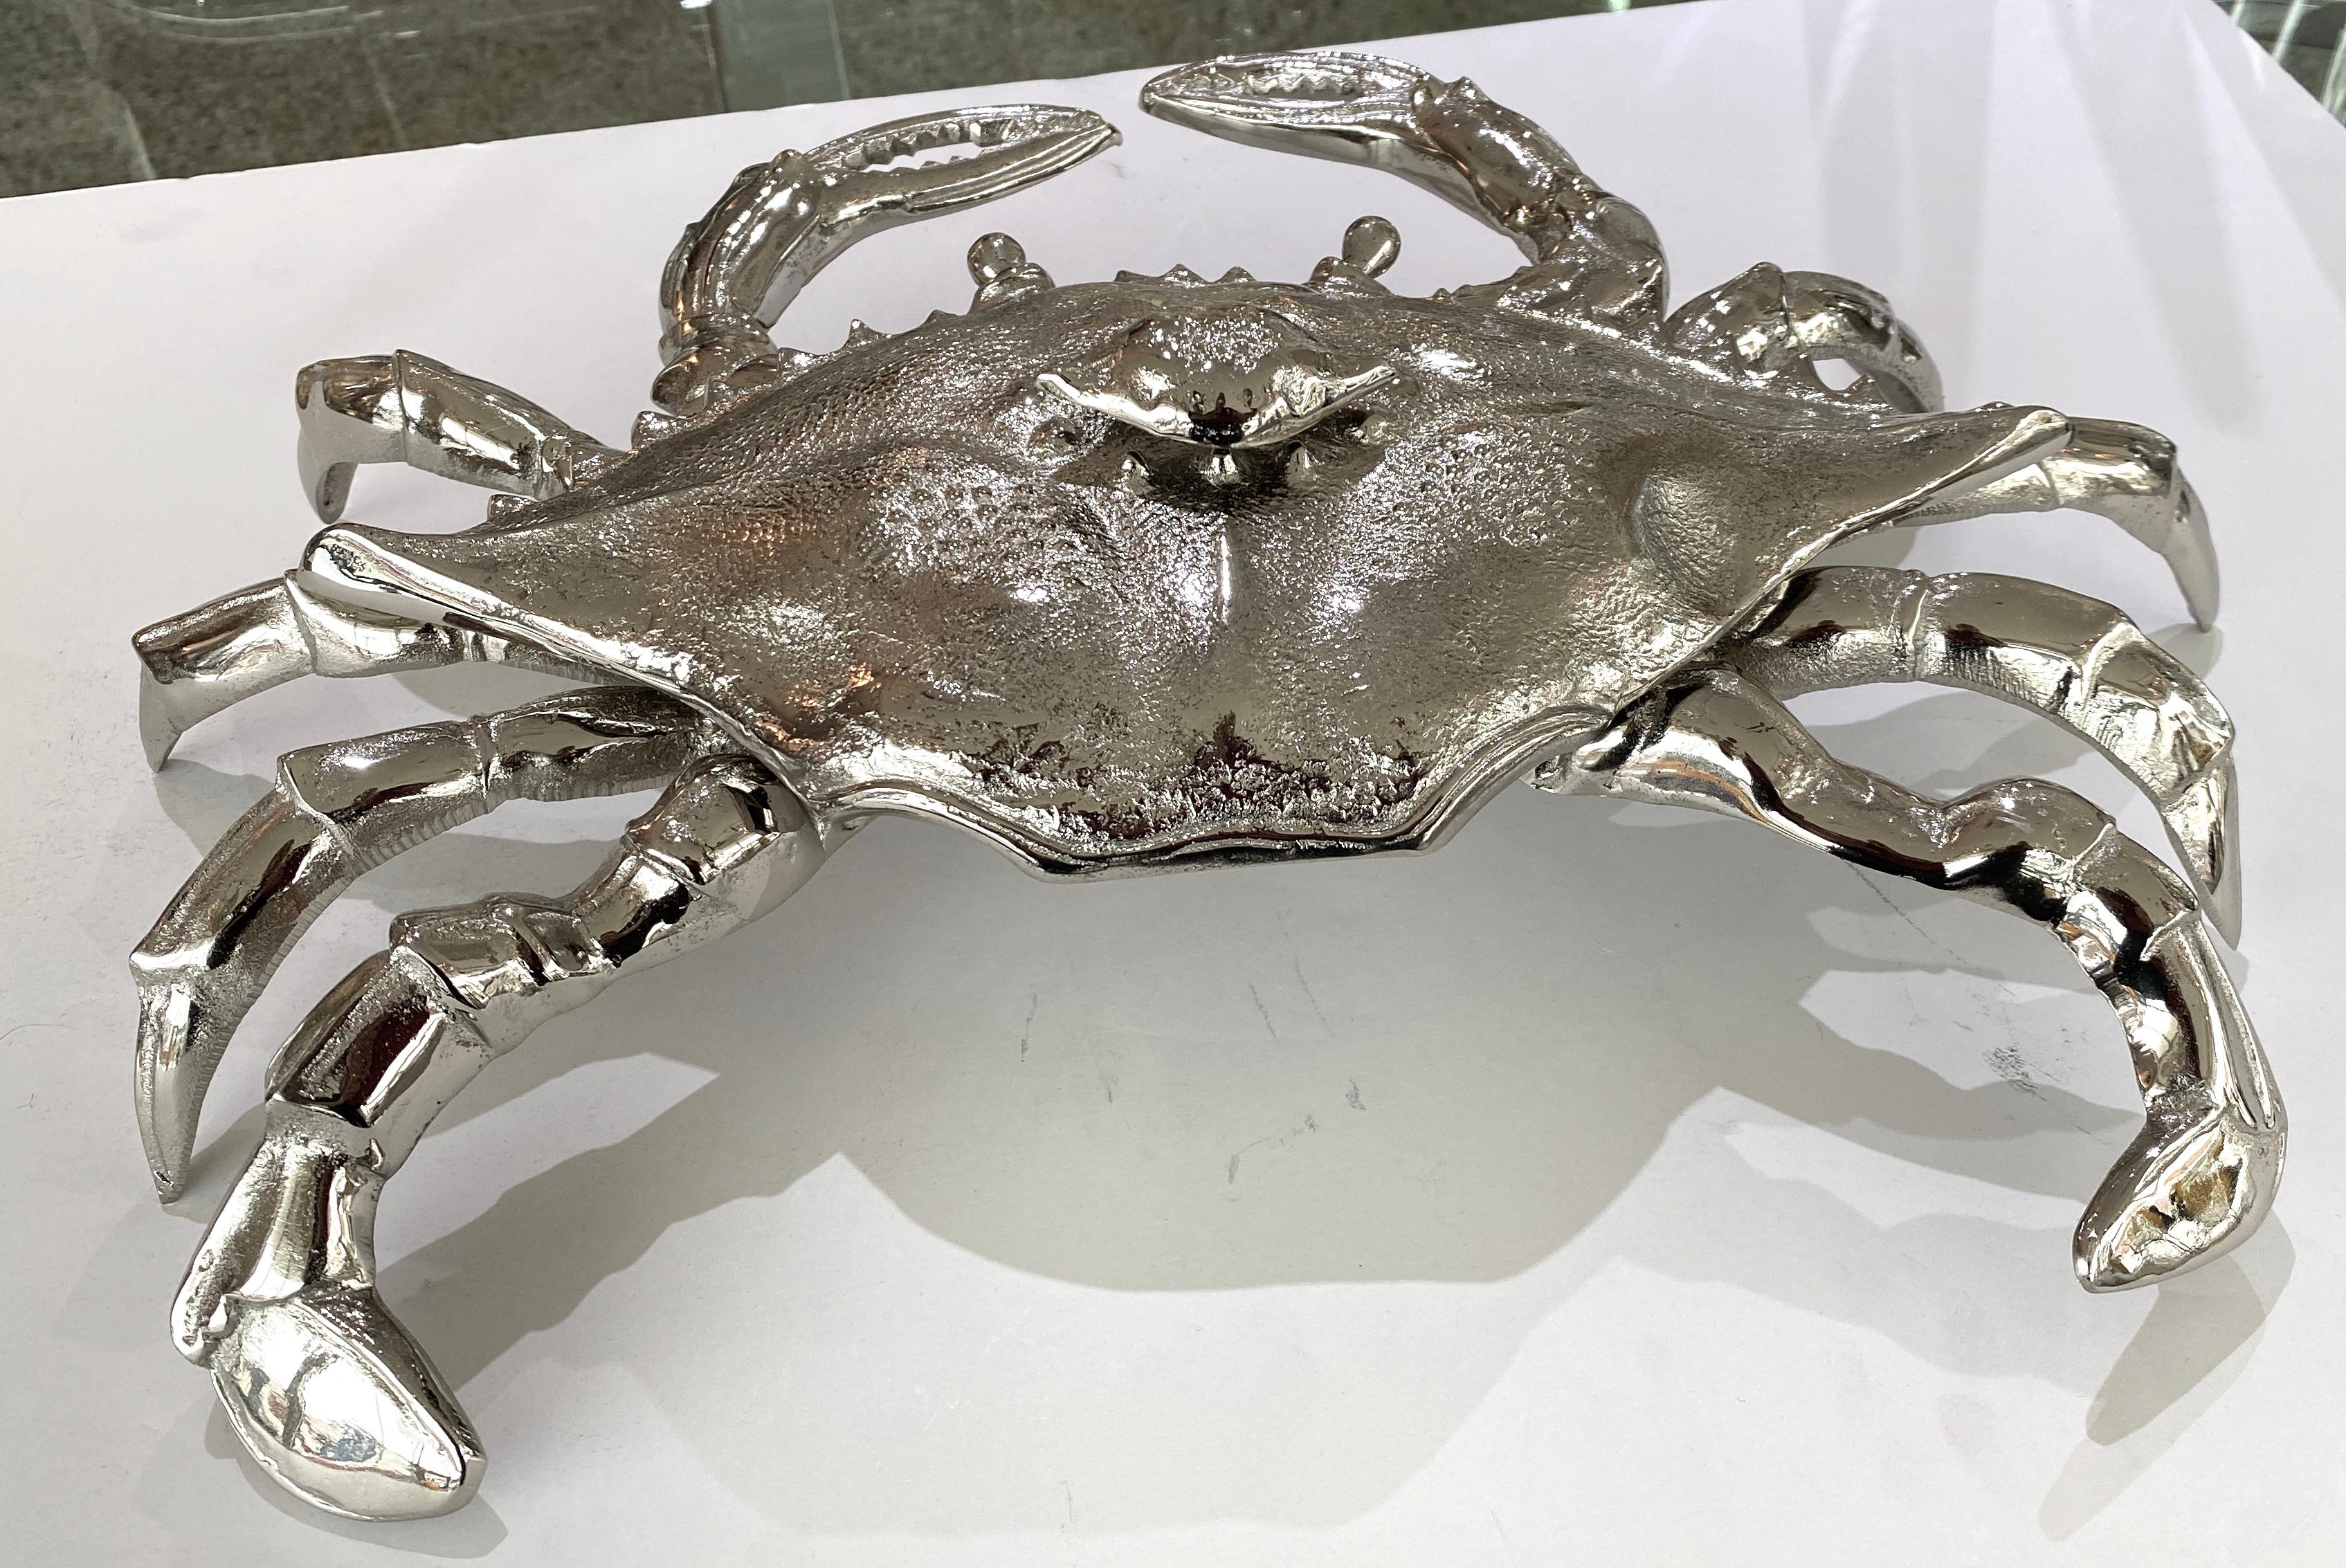 Polished Nickel Plated Crab Form Figure by Angel & Zevallos